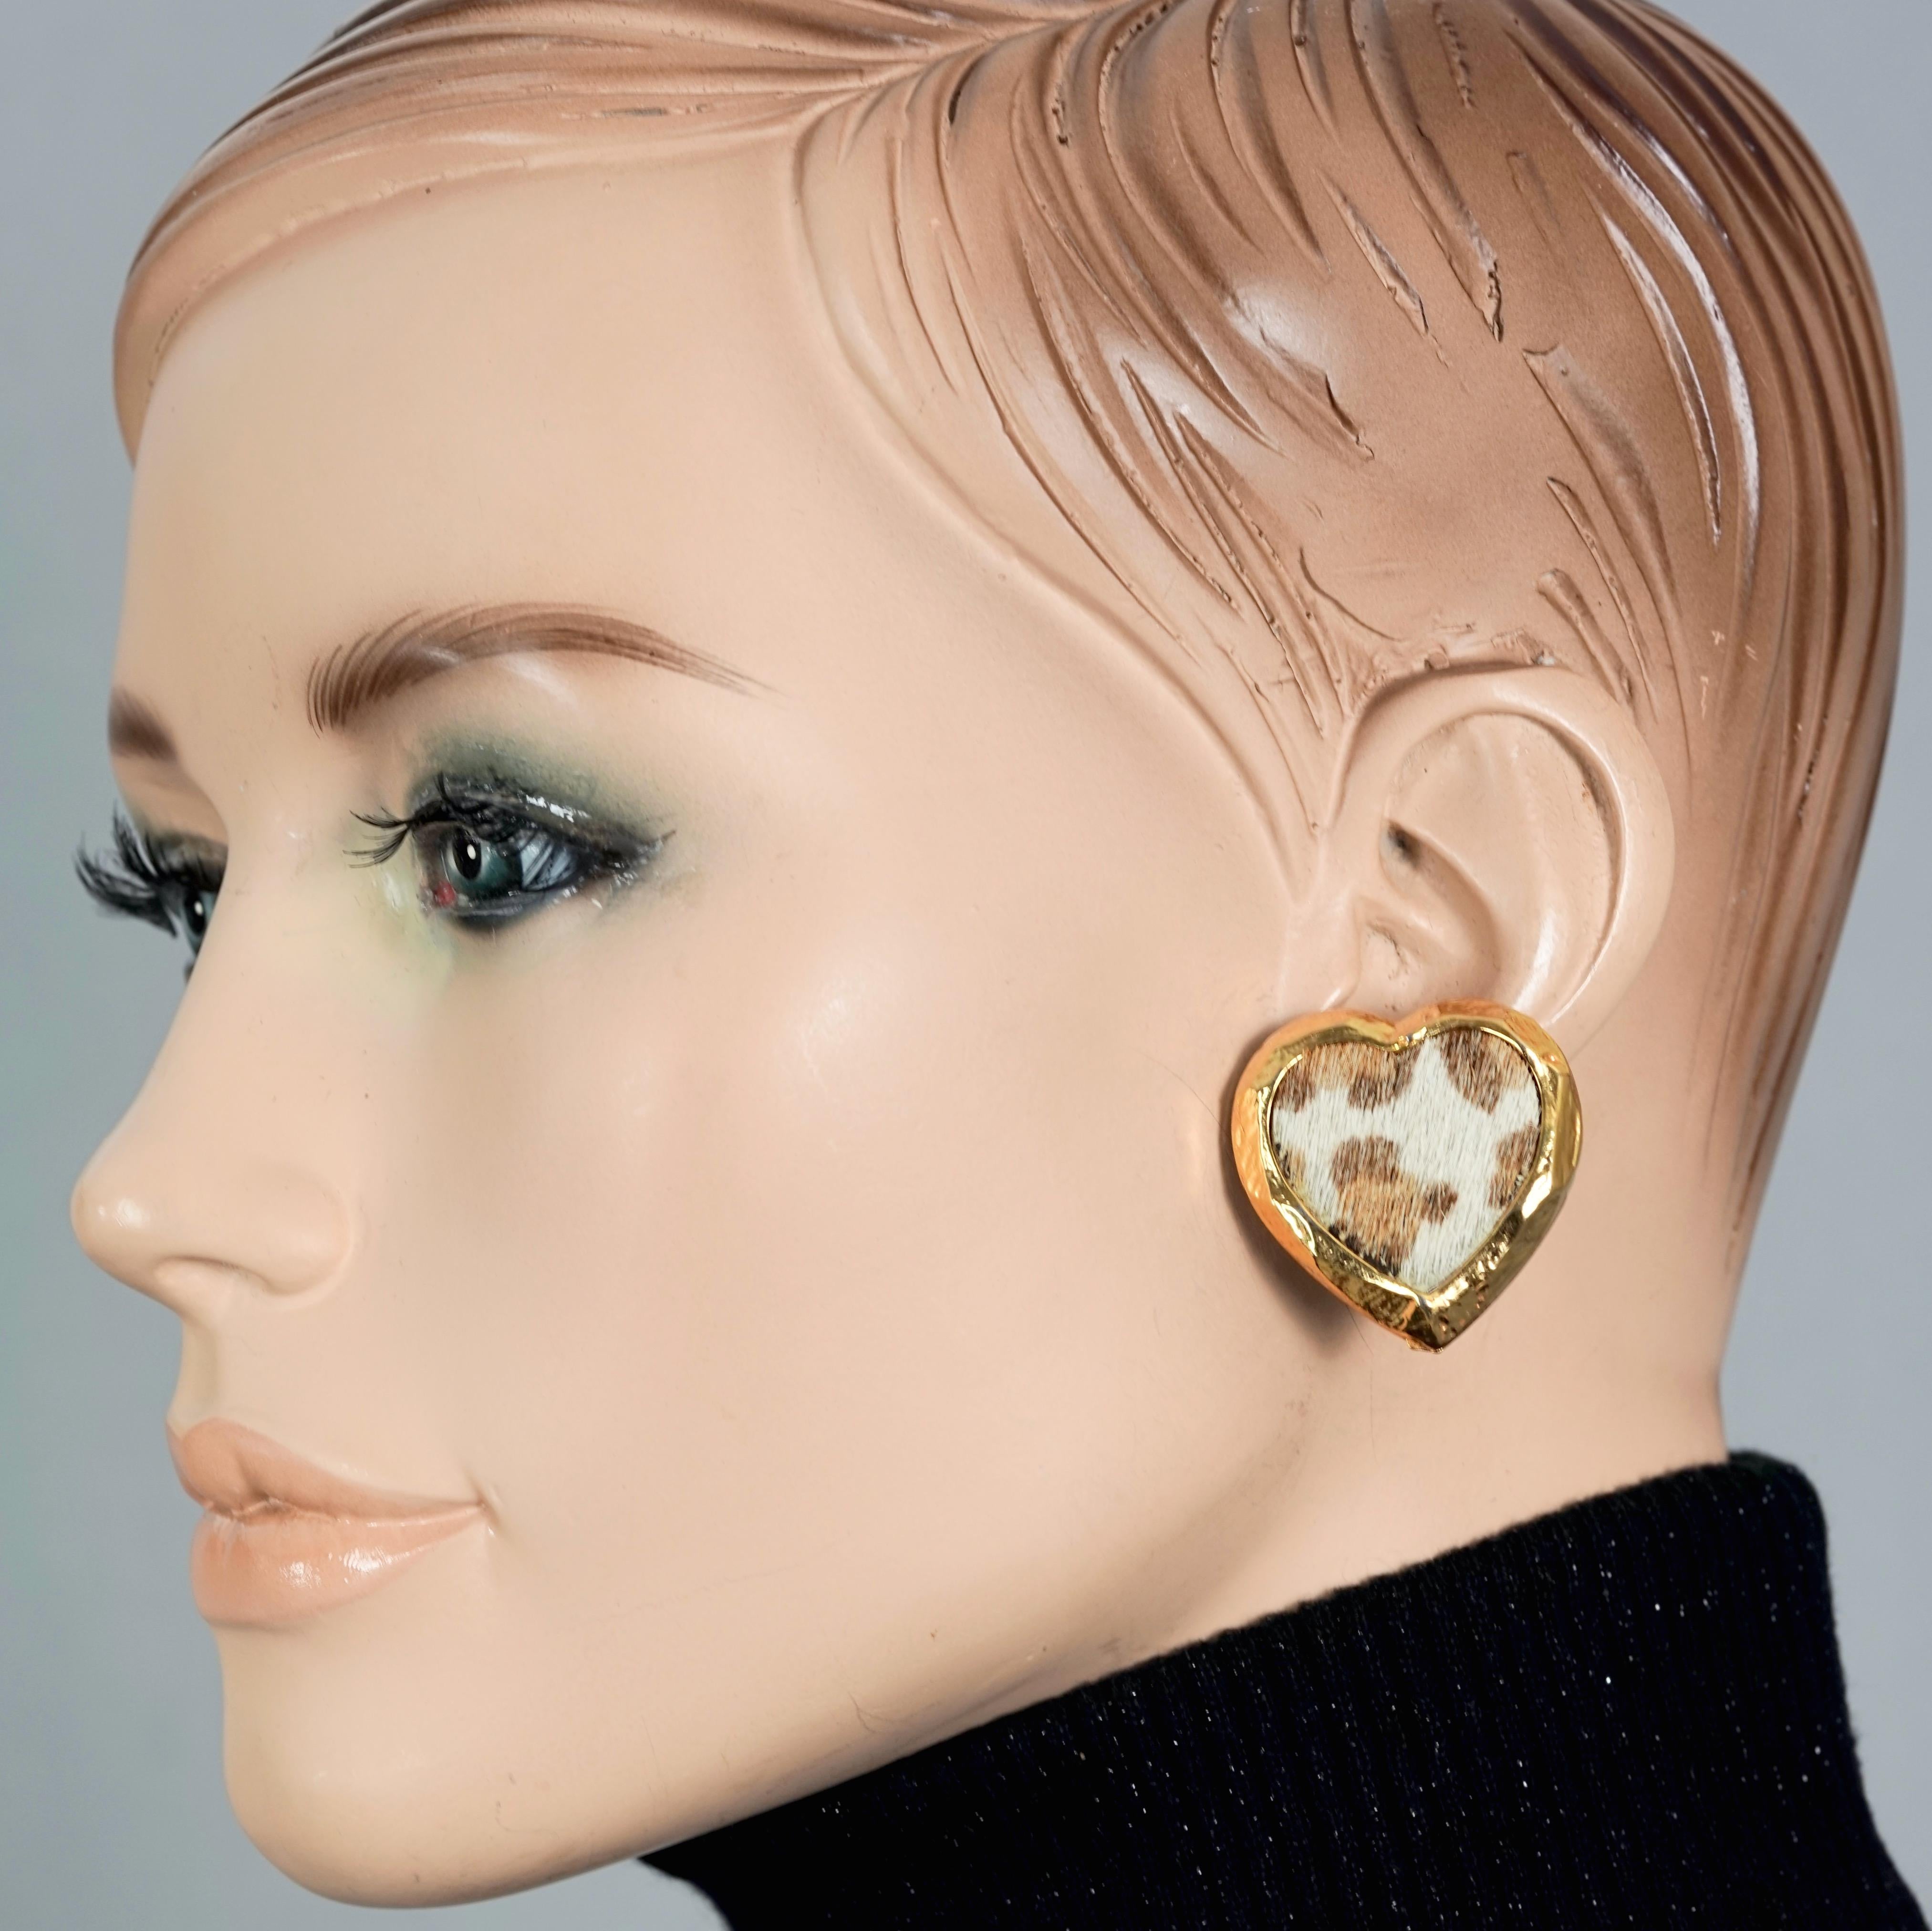 Vintage EDOUARD RAMBAUD Heart Faux Fur Leopard Gilt Earrings

Measurements:
Height: 1.33 inches (3.4 cm)
Width: 1.29 inches (3.3 cm)
Weight per Earring: 13 grams

Features:
- 100% Authentic EDOUARD RAMBAUD.
- Gilt heart earrings with faux leopard